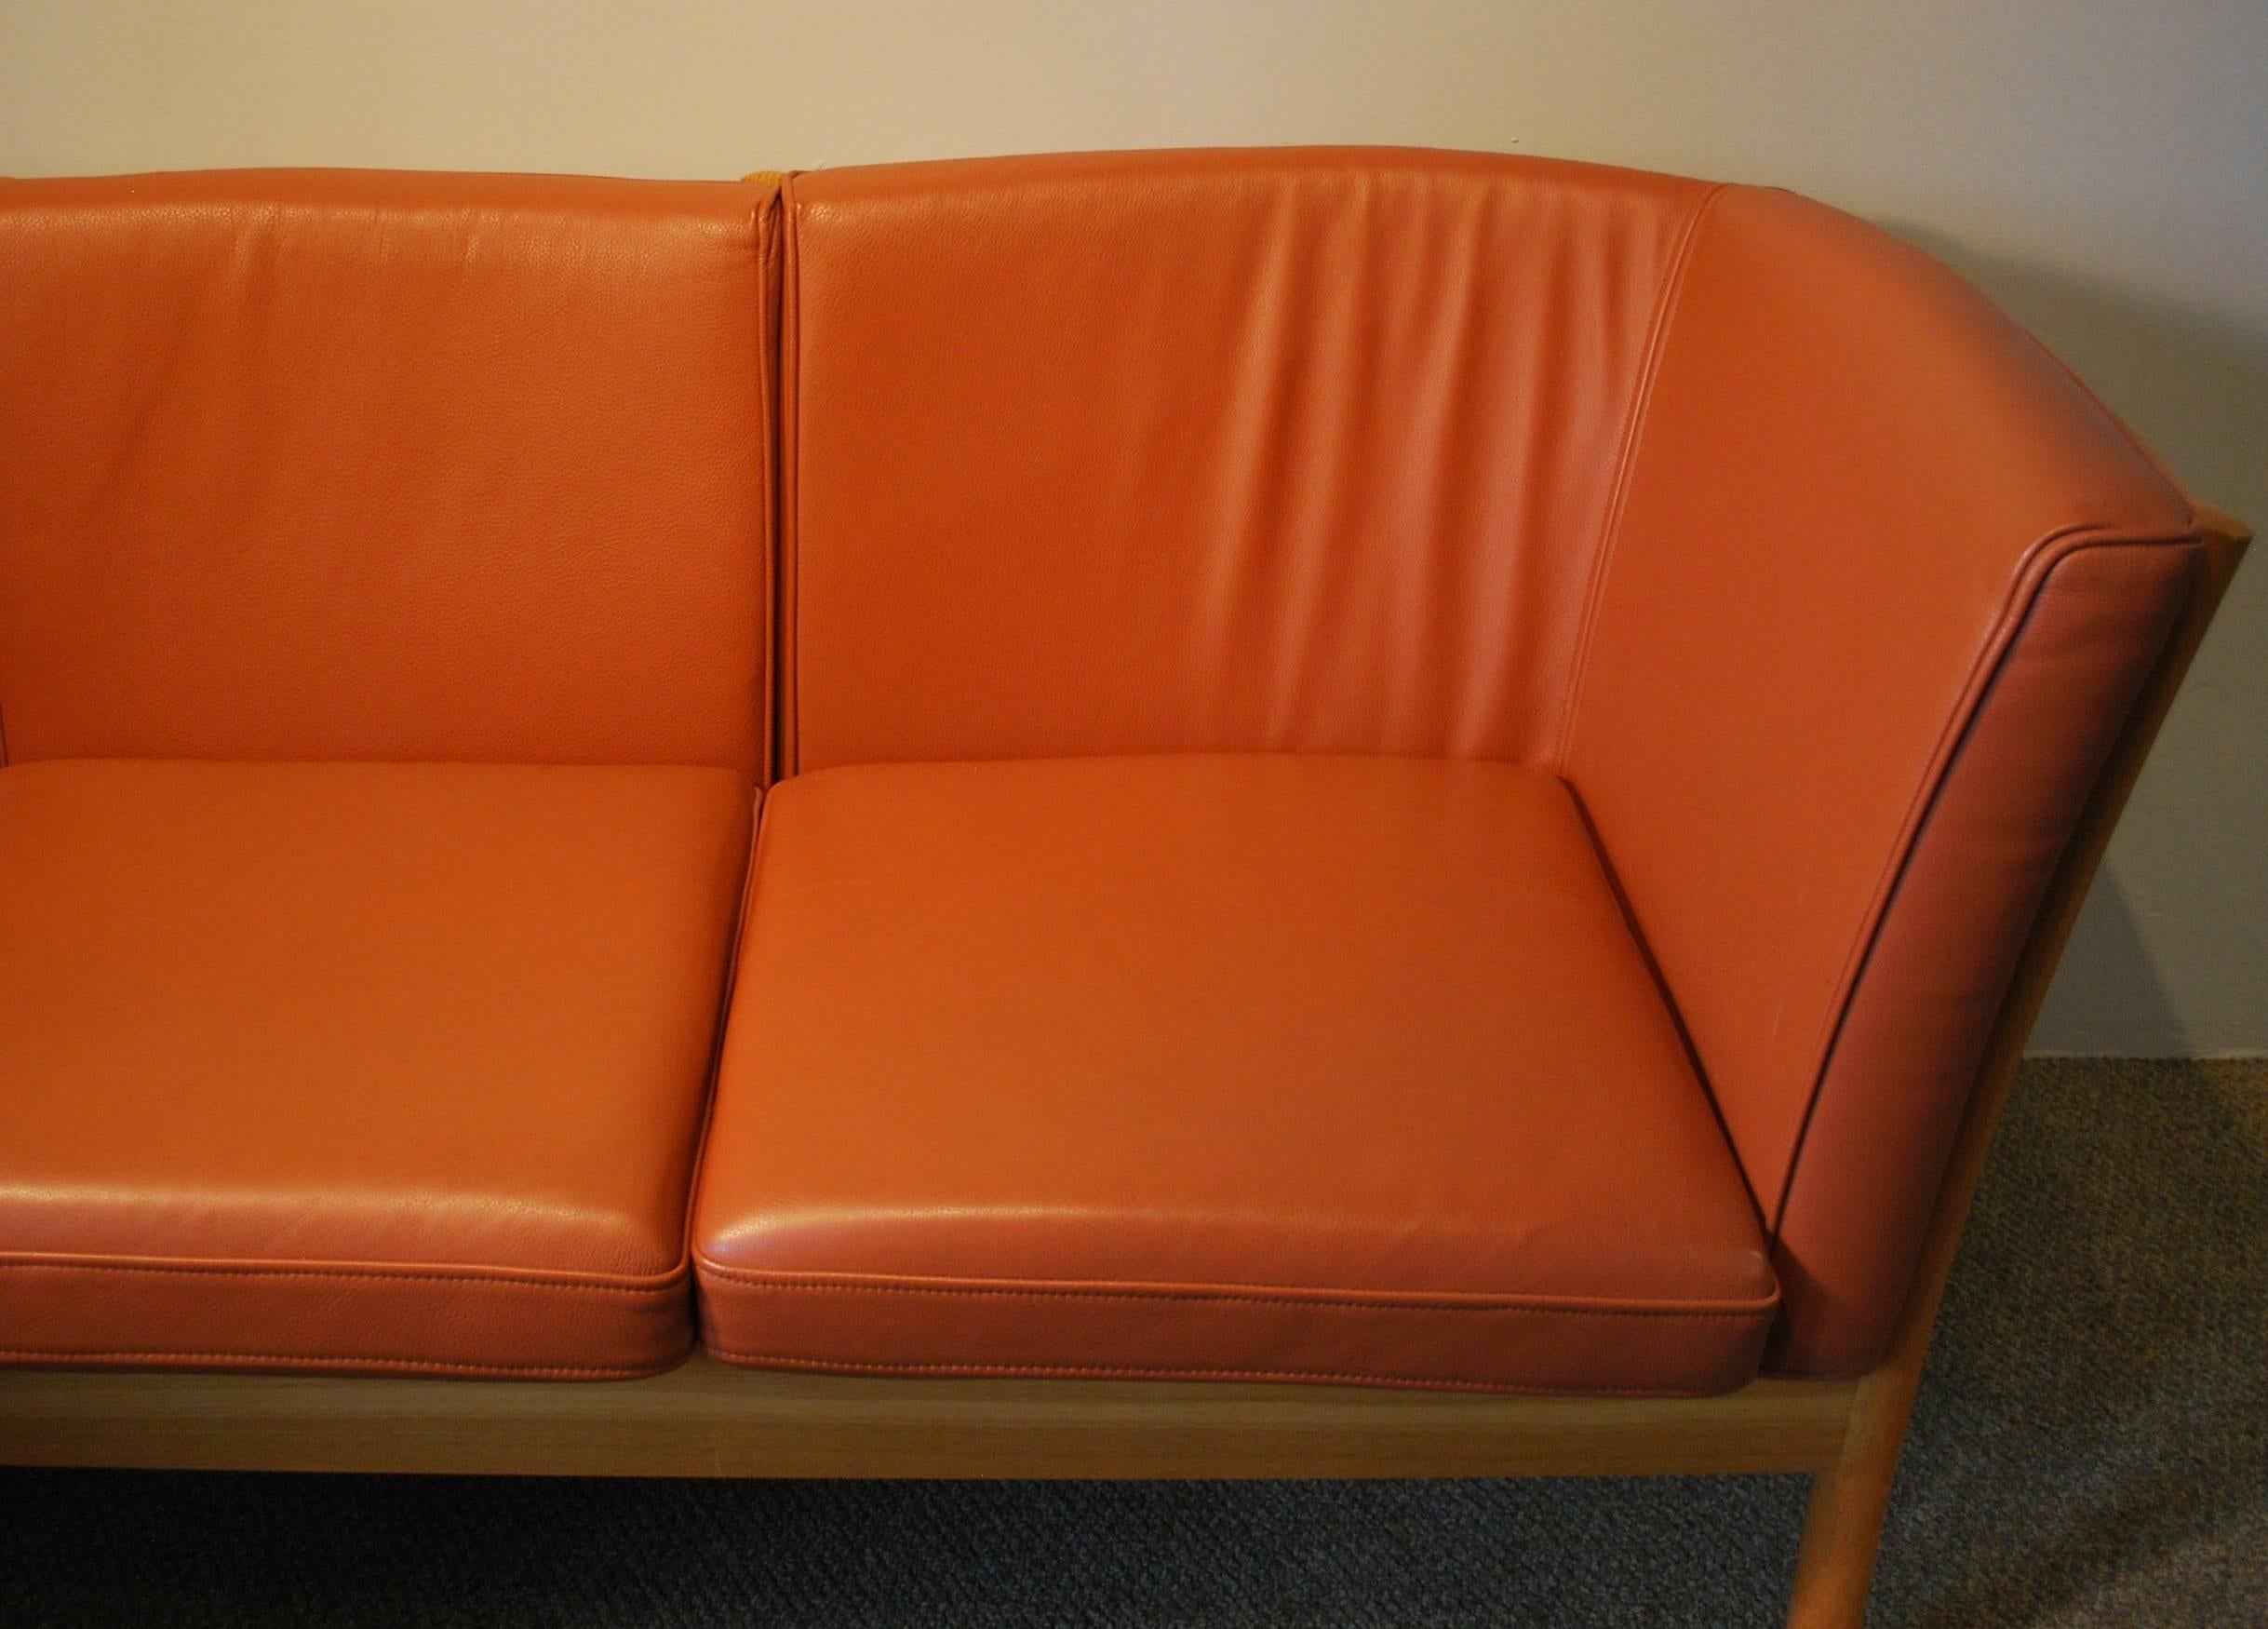 Late 20th Century Danish Modern Leather Sofa by Hurup with a Shaped Oak Frame For Sale